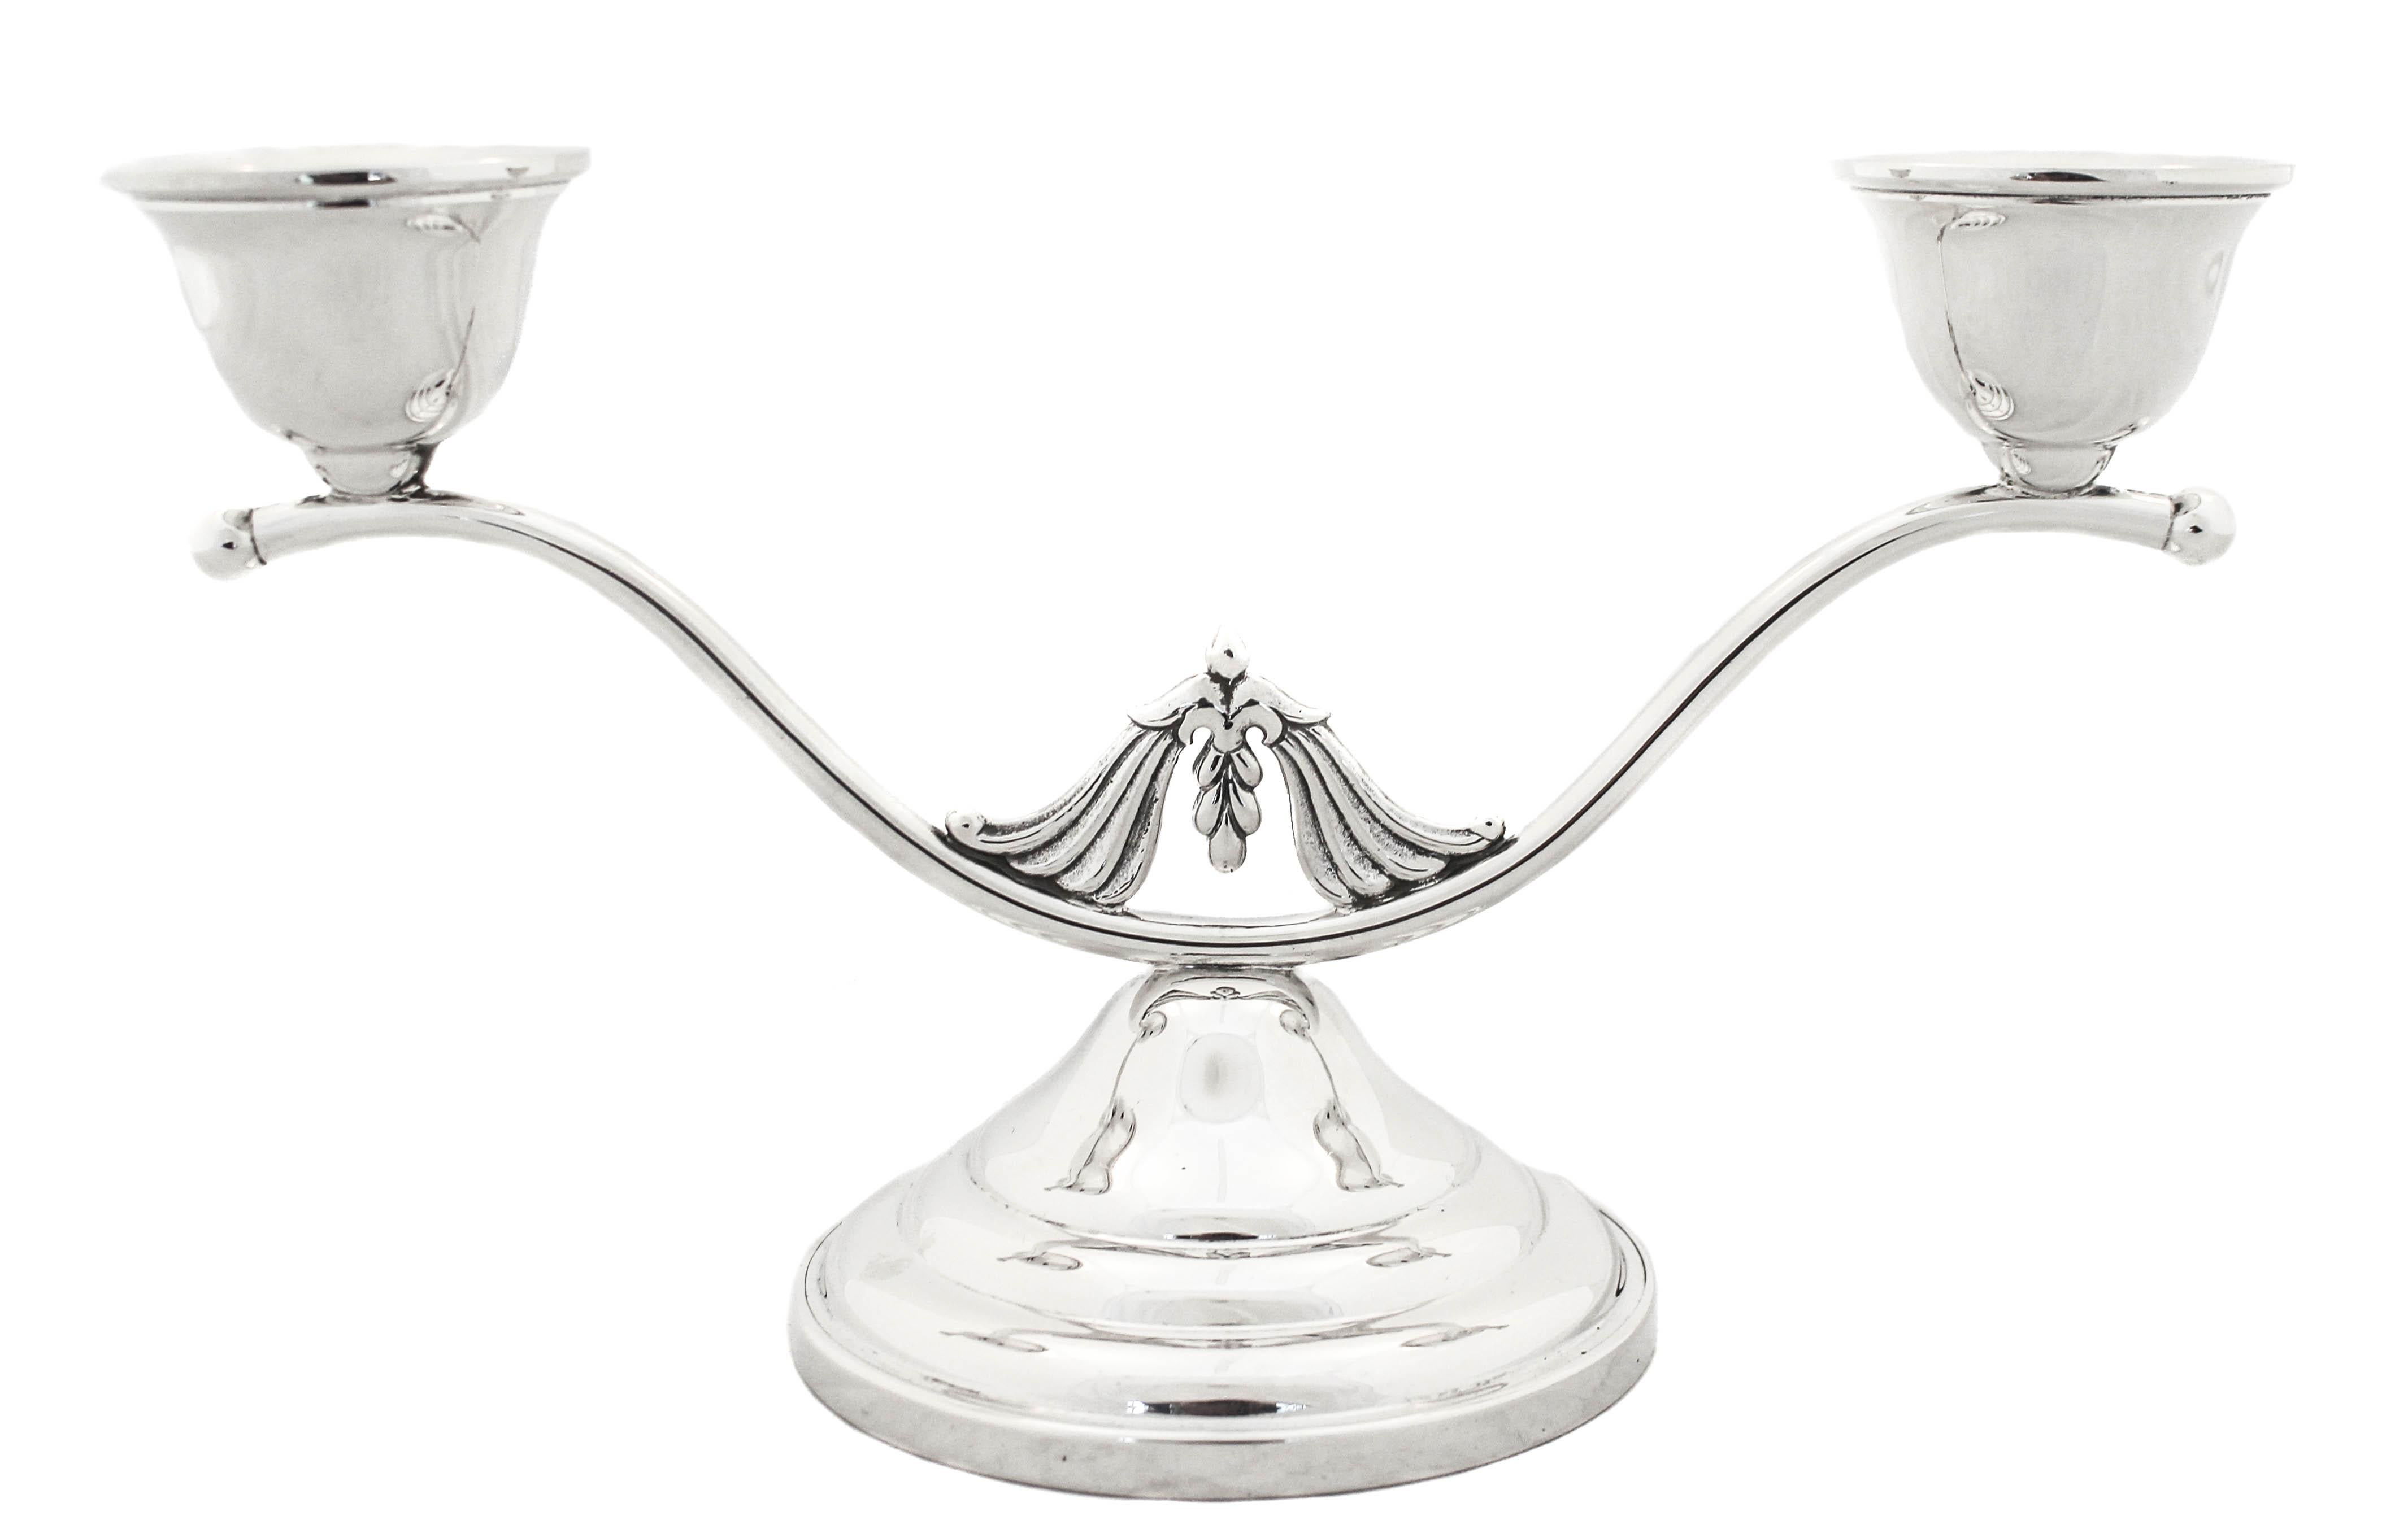 We are happy to offer you this pair of sterling silver candelabras by The Randahl Shop of Chicago, Illinois. Each candelabra has two branches that swirl outwards, in the center a decorative piece sits in the valley. The candelabras are modern with